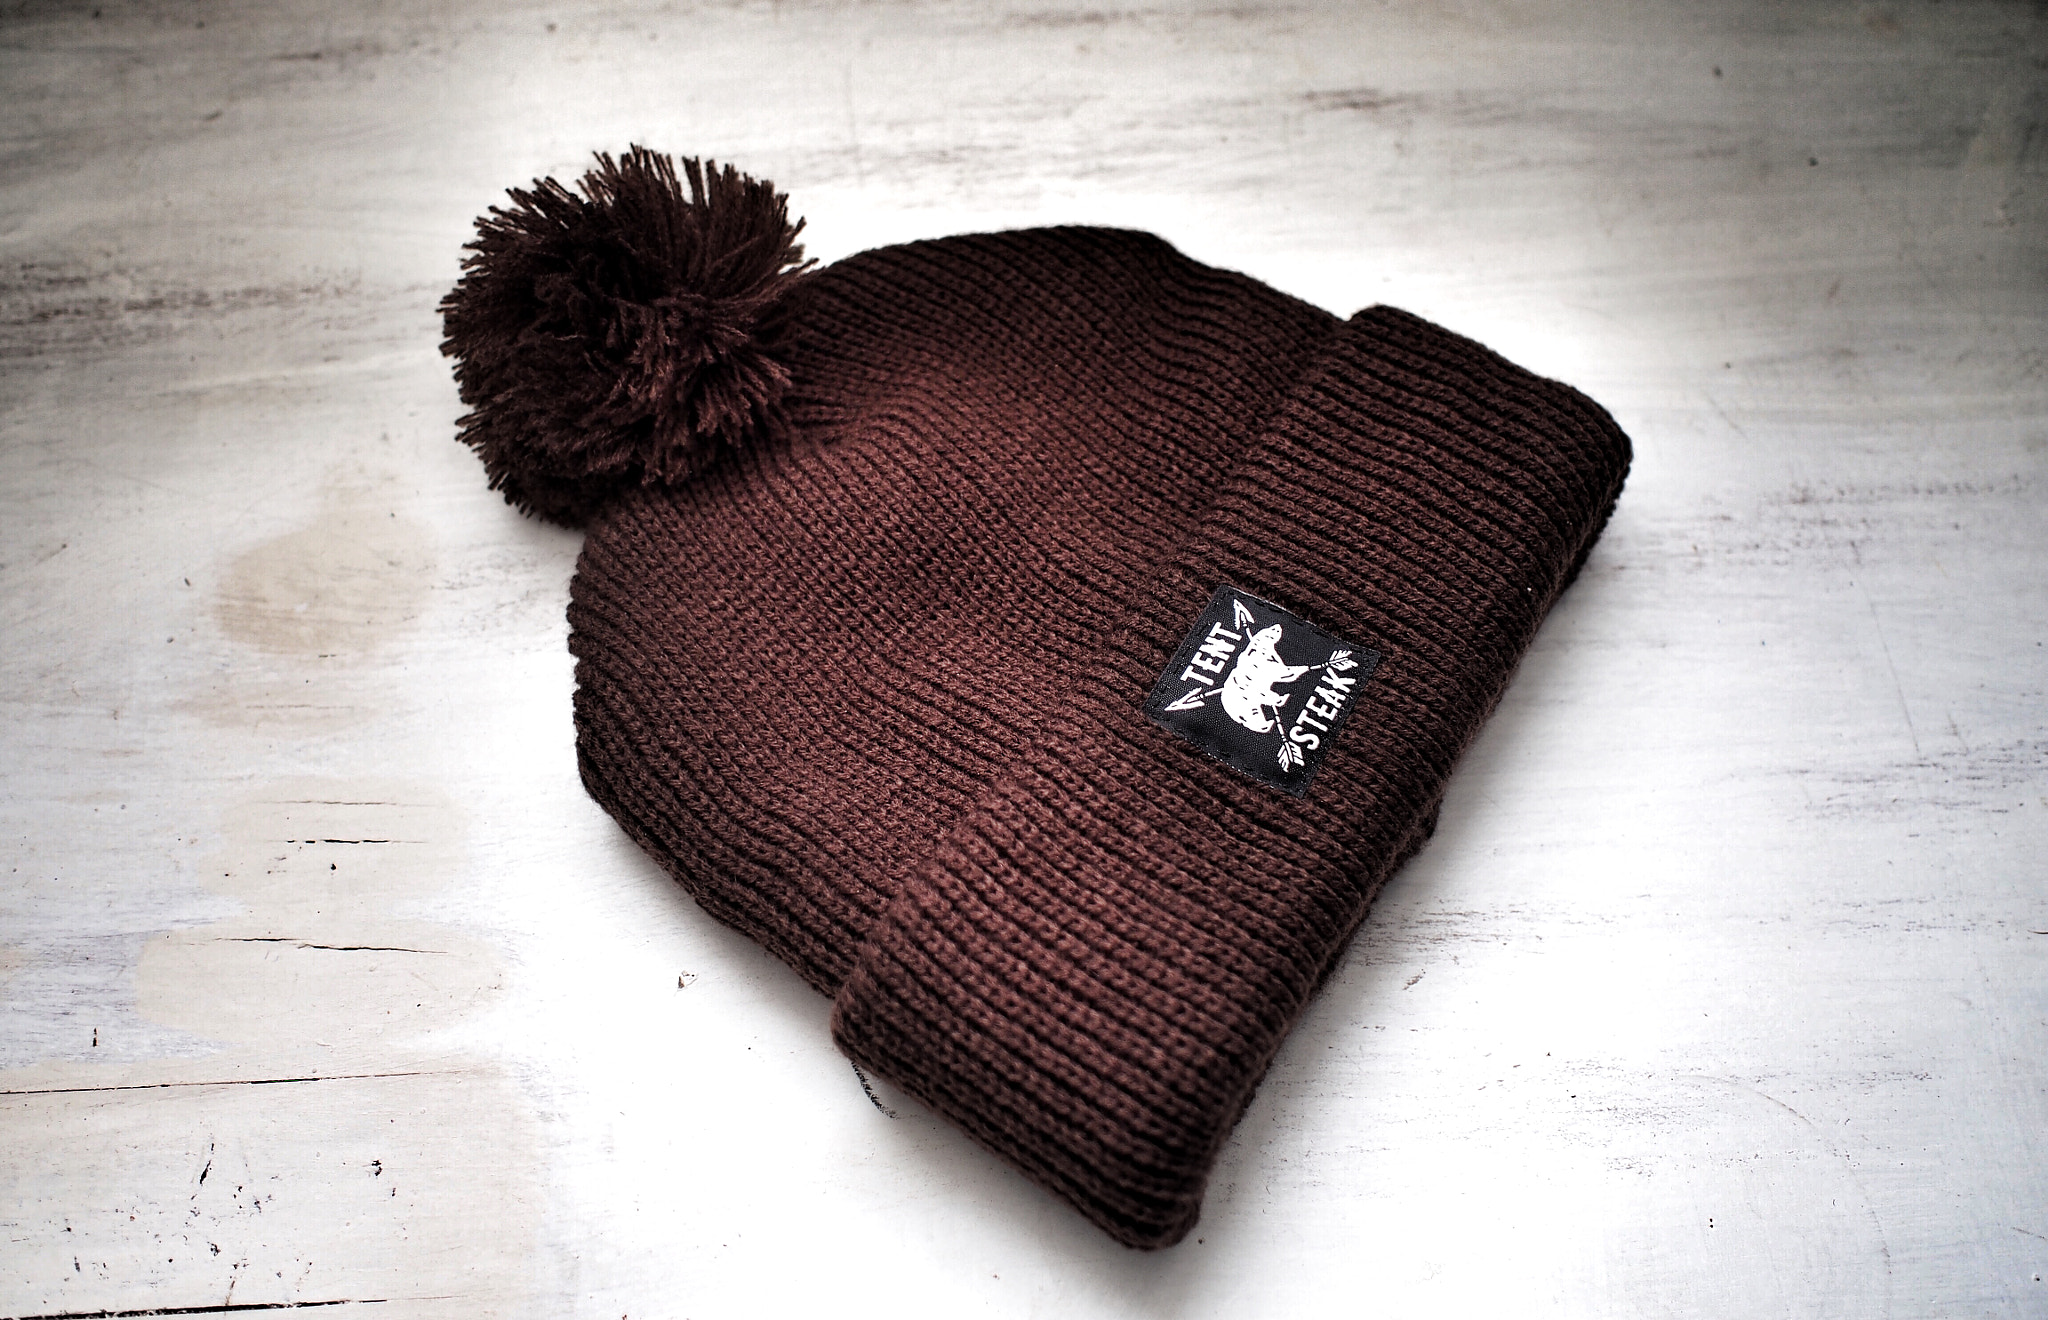 Olympus OM-D E-M5 sample photo. New tent steak beanies are in! shot with an olympus omd e-m5 with 17mm f1.8 lens photography